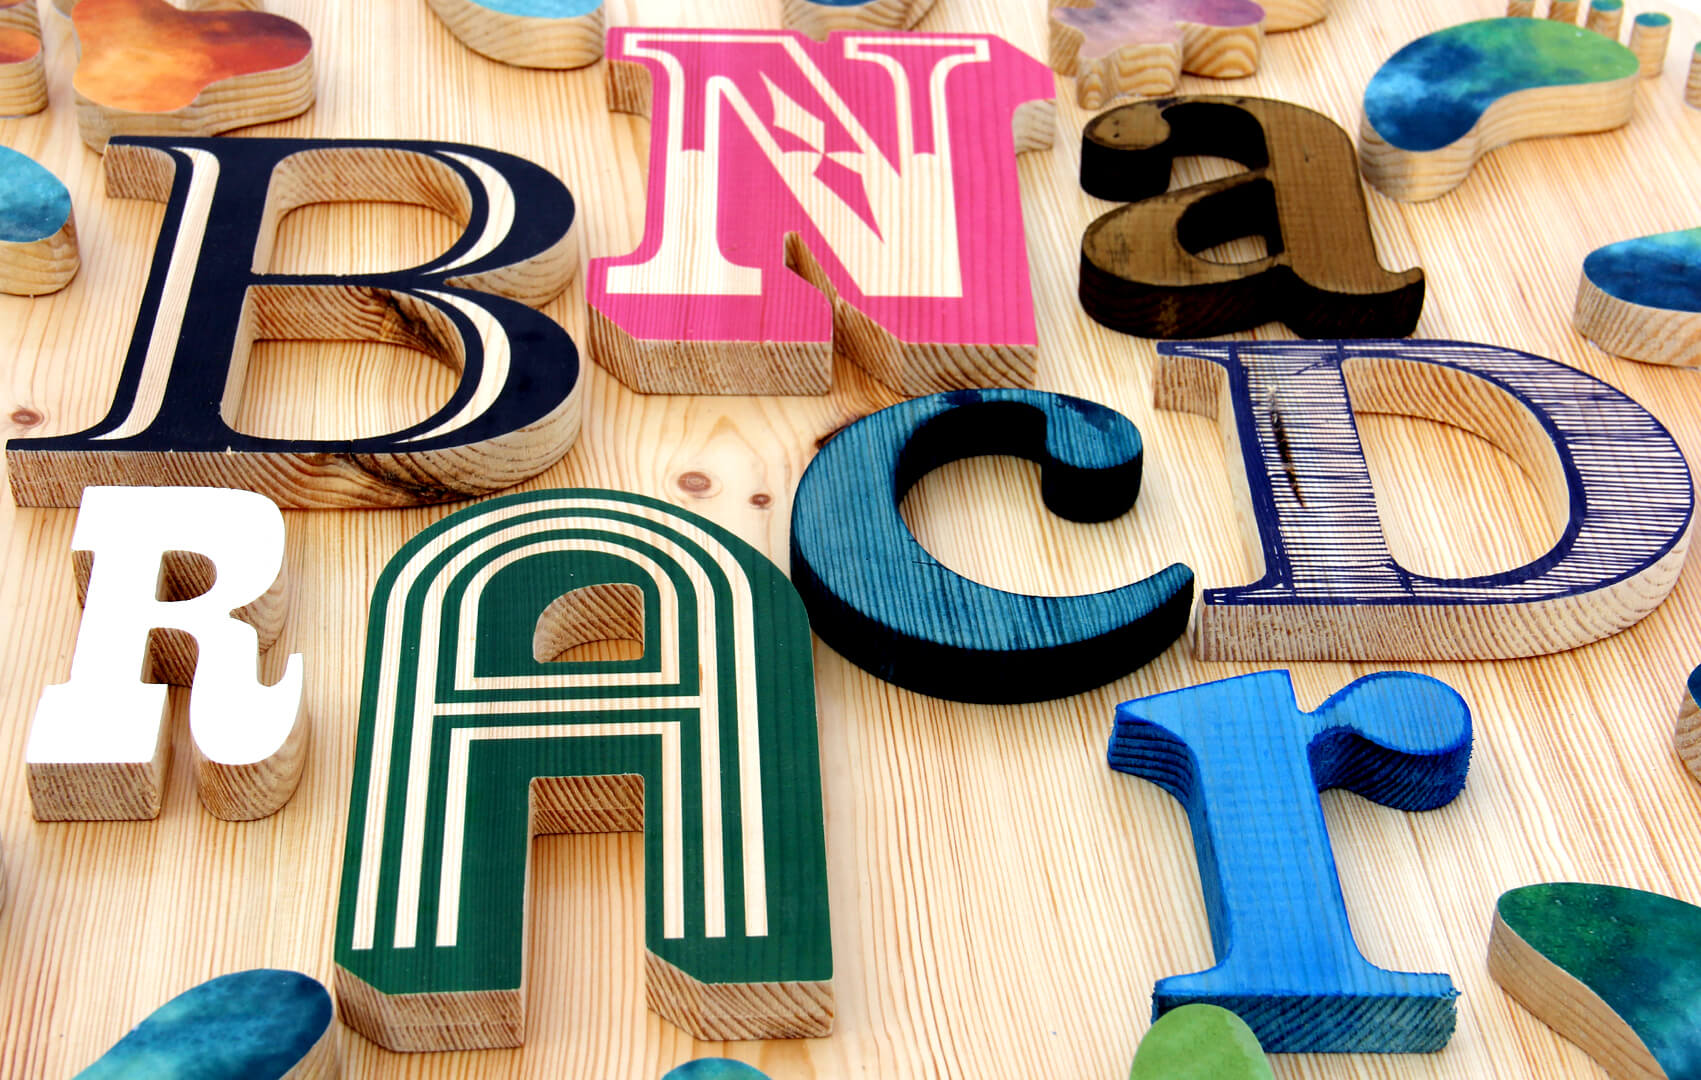 wood-letters-DIY - wood-letters-DIY-creative-letters-colored-wood-letters